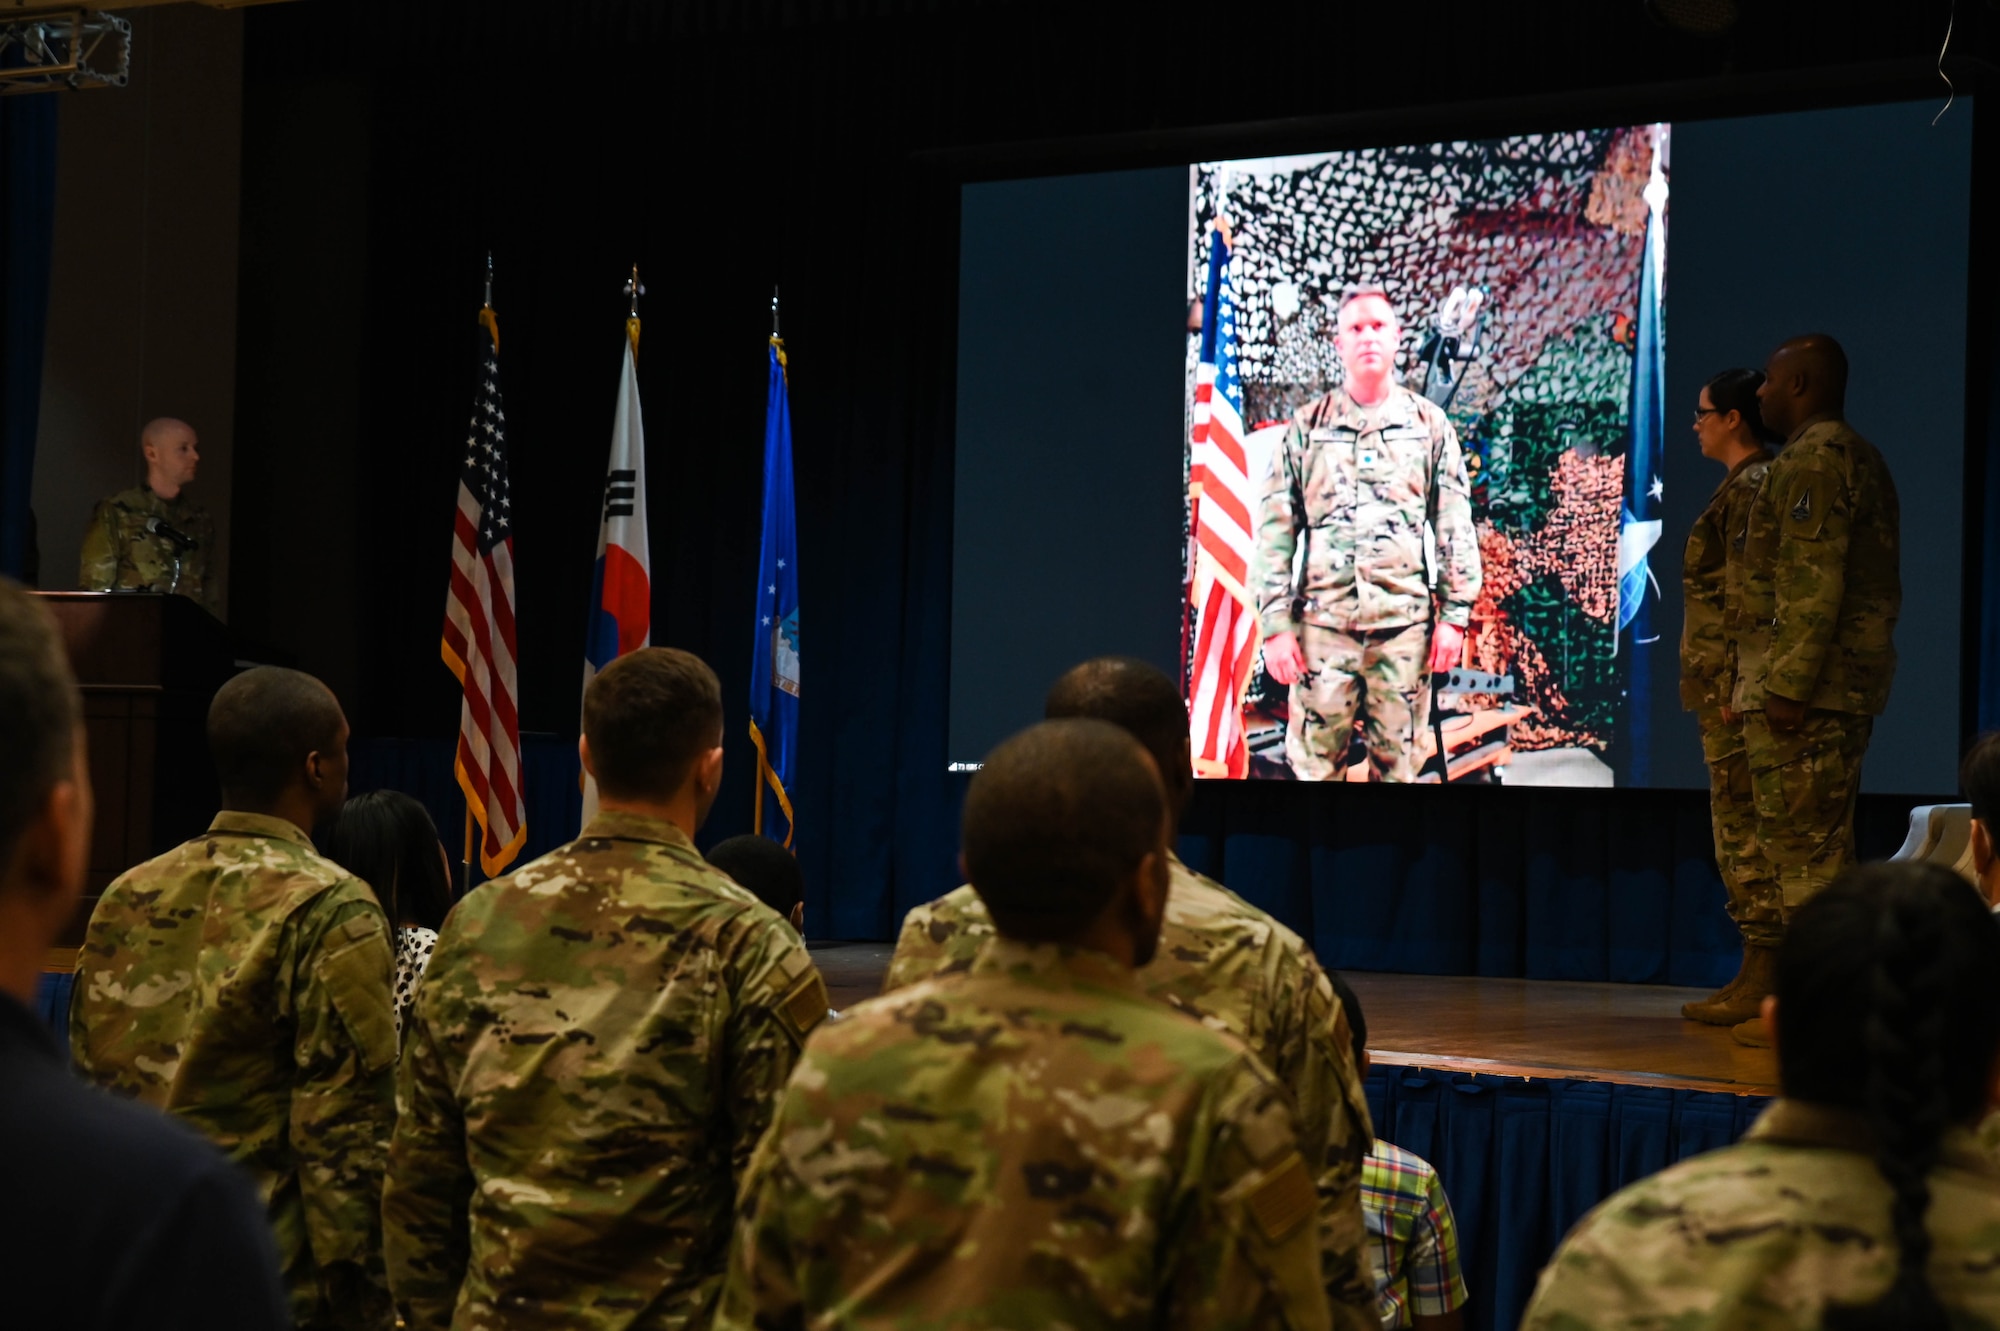 The 73rd Intelligence, Surveillance, and Reconnaissance Squadron Detachment 2 held a change of command ceremony at Osan Air Base, Republic of Korea, June 30, 2021. Maj. Rachel Johnston transferred command of the 73rd ISRS Det 2 to Maj. Kenneth Jenkins II.